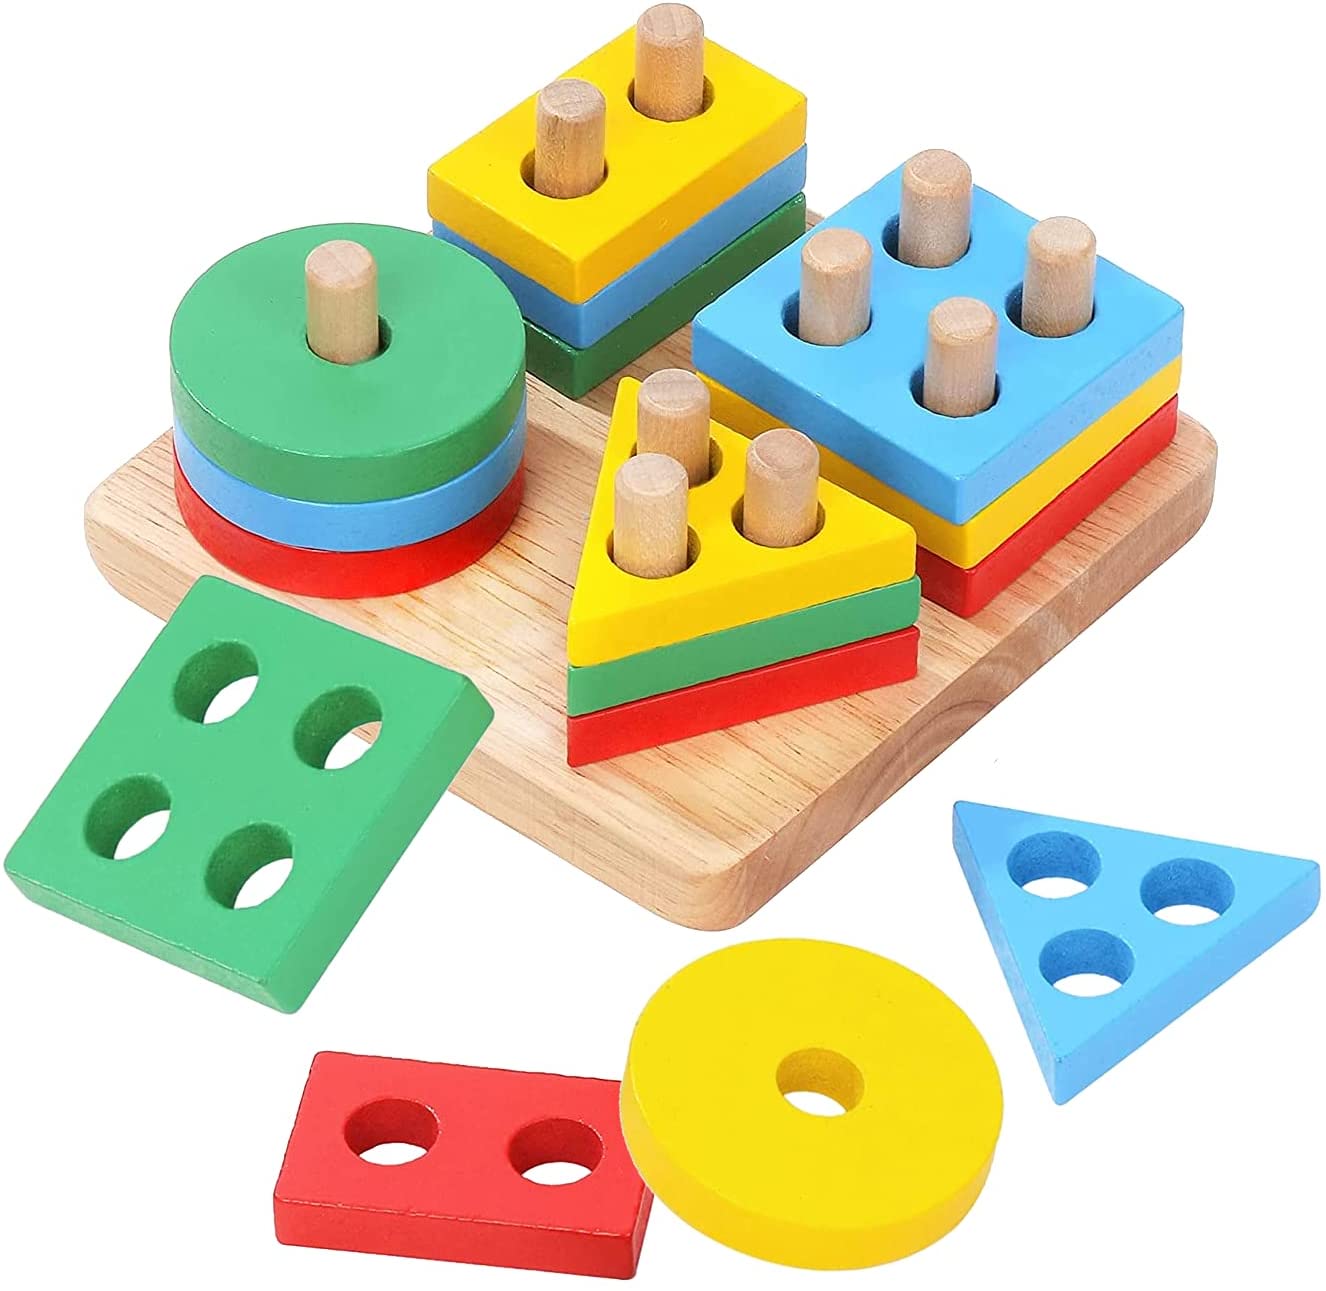 Montessori Wooden Kitchen Toys perfect gift for a little girl